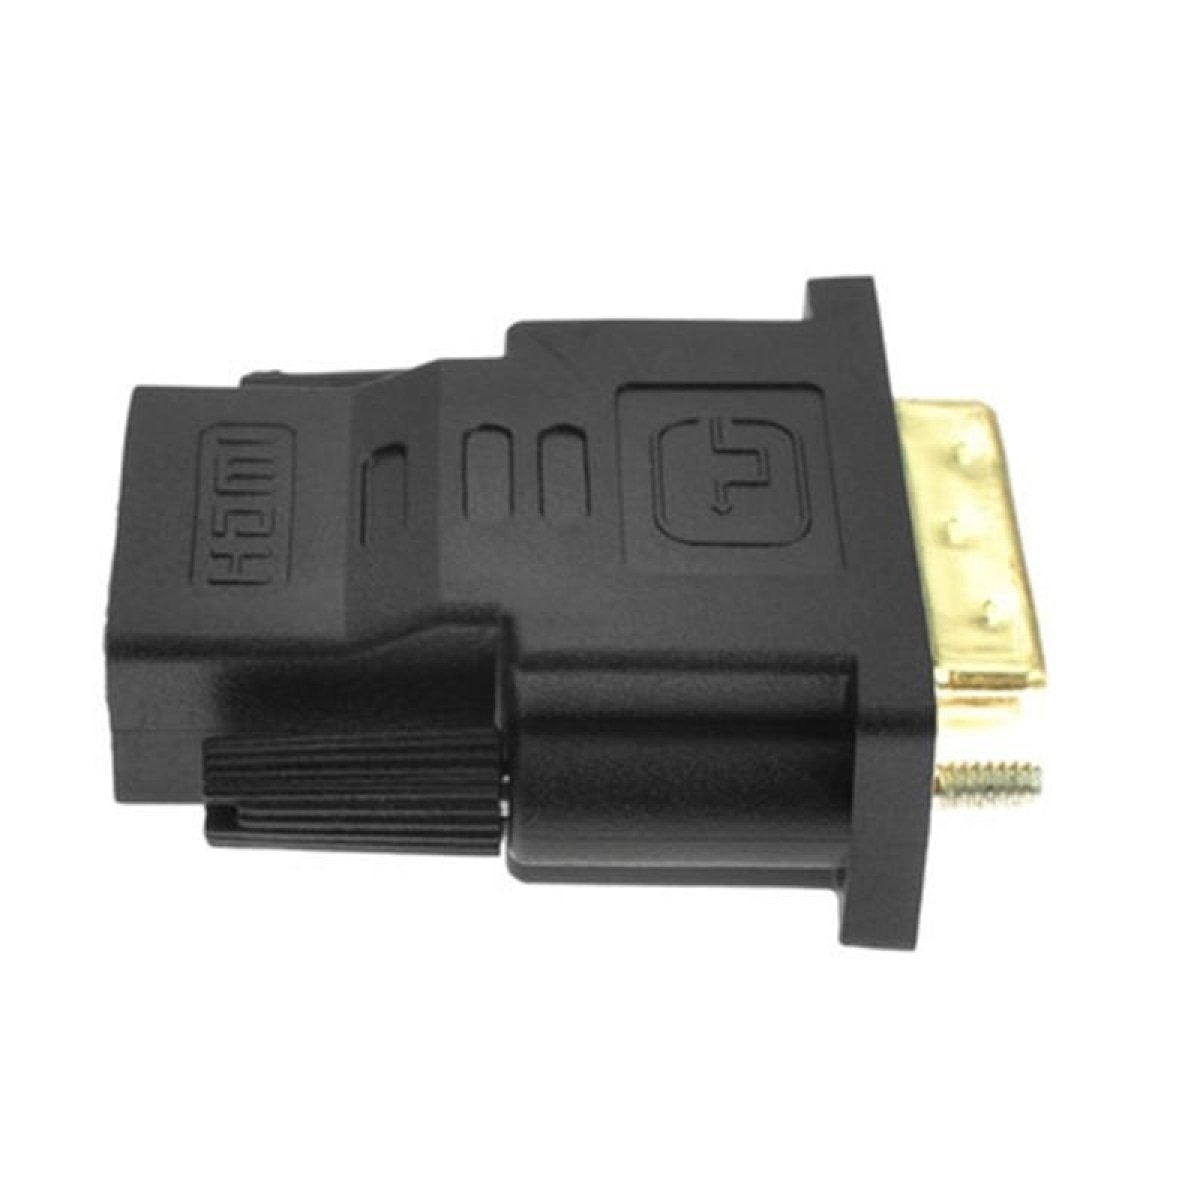 HDMI to DVI Cable 24+1 Pin Adaptor 4K Bi-Directional Male to HDMI Male Converter | 3m | Asia Sell